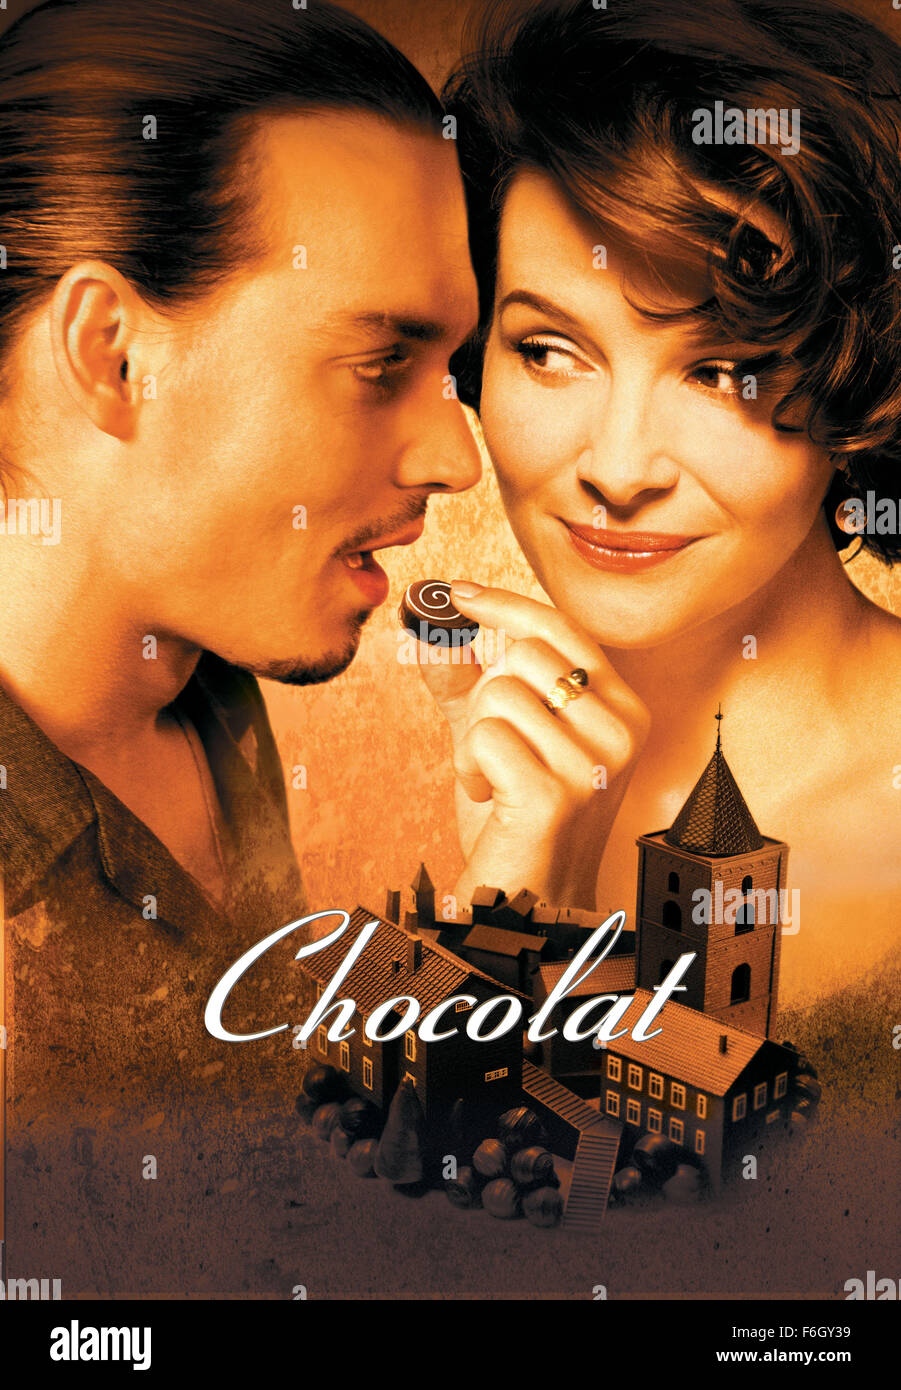 RELEASE DATE: January 5, 2001. MOVIE TITLE: Chocolate. STUDIO: Miramax Films. PLOT: When a single mother and her six-year-old daughter move to rural France and open a chocolate shop - with Sunday hours - across the street from the local church, they are met with some skepticism. But as soon as they coax the townspeople into enjoying their delicious products, they are warmly welcomed. PICTURED: JOHNNY DEPP as Roux and JULIETTE BINOCHE as Vianne. Stock Photo